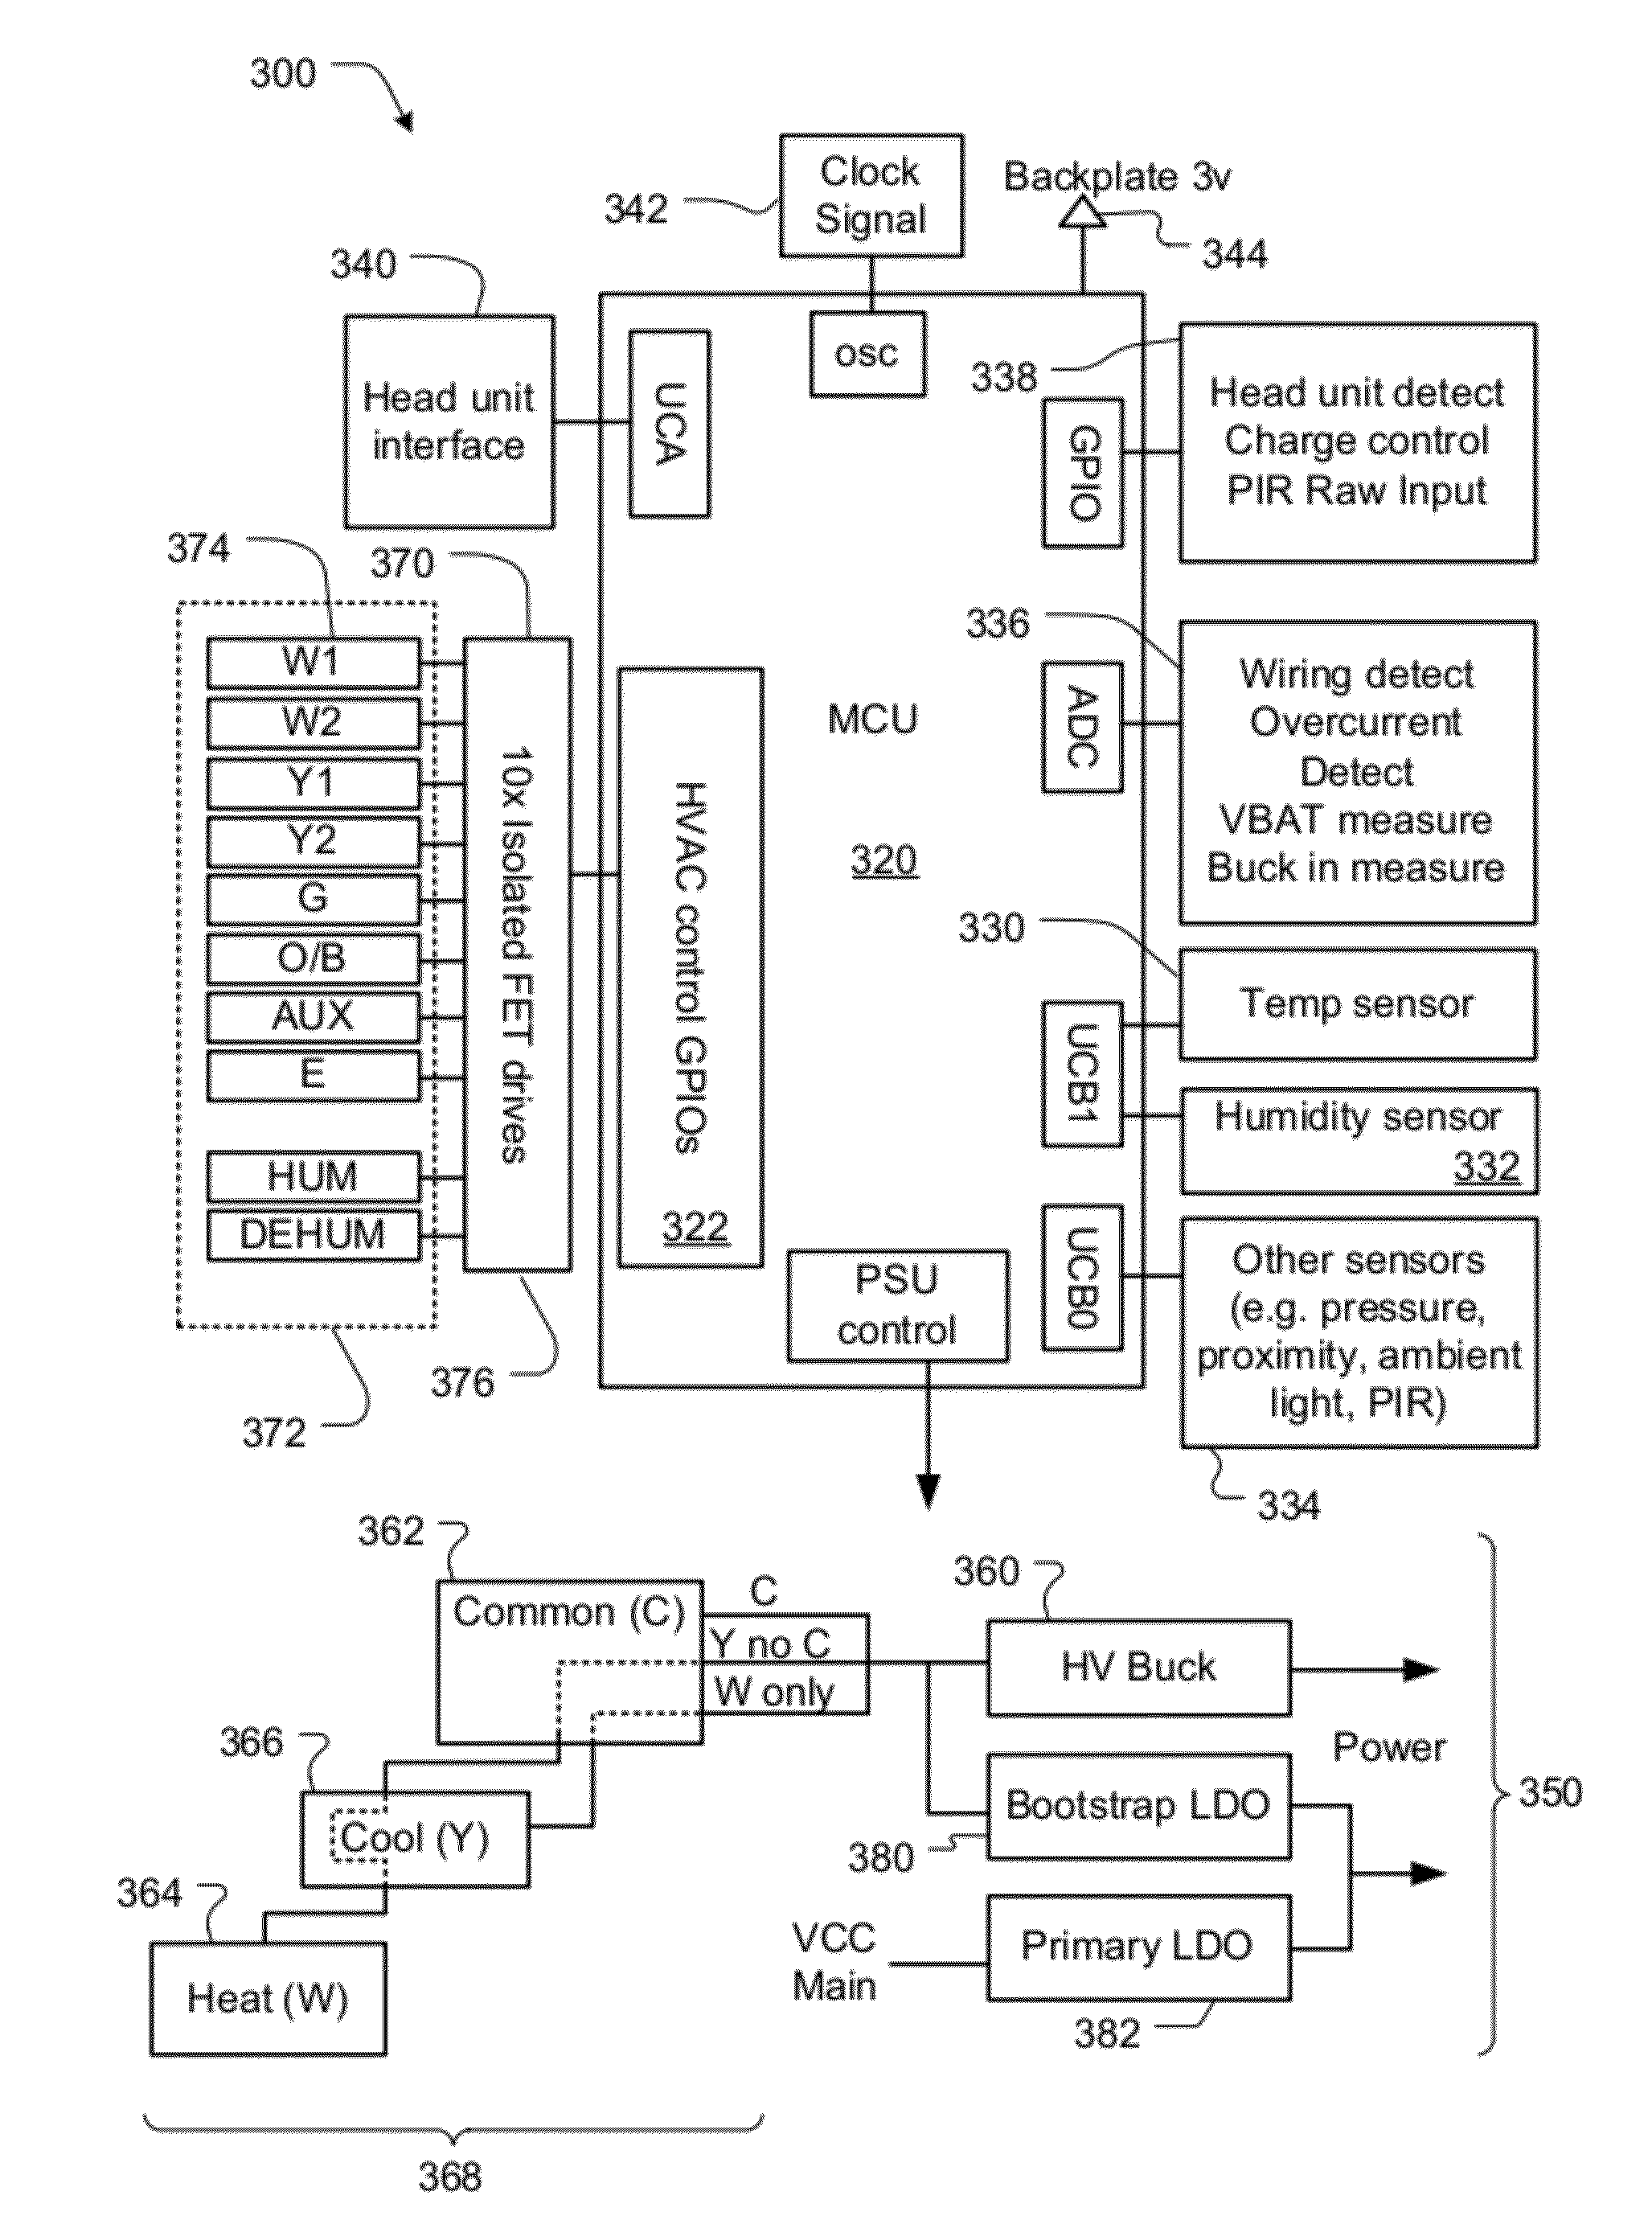 Power-preserving communications architecture with long-polling persistent cloud channel for wireless network-connected thermostat